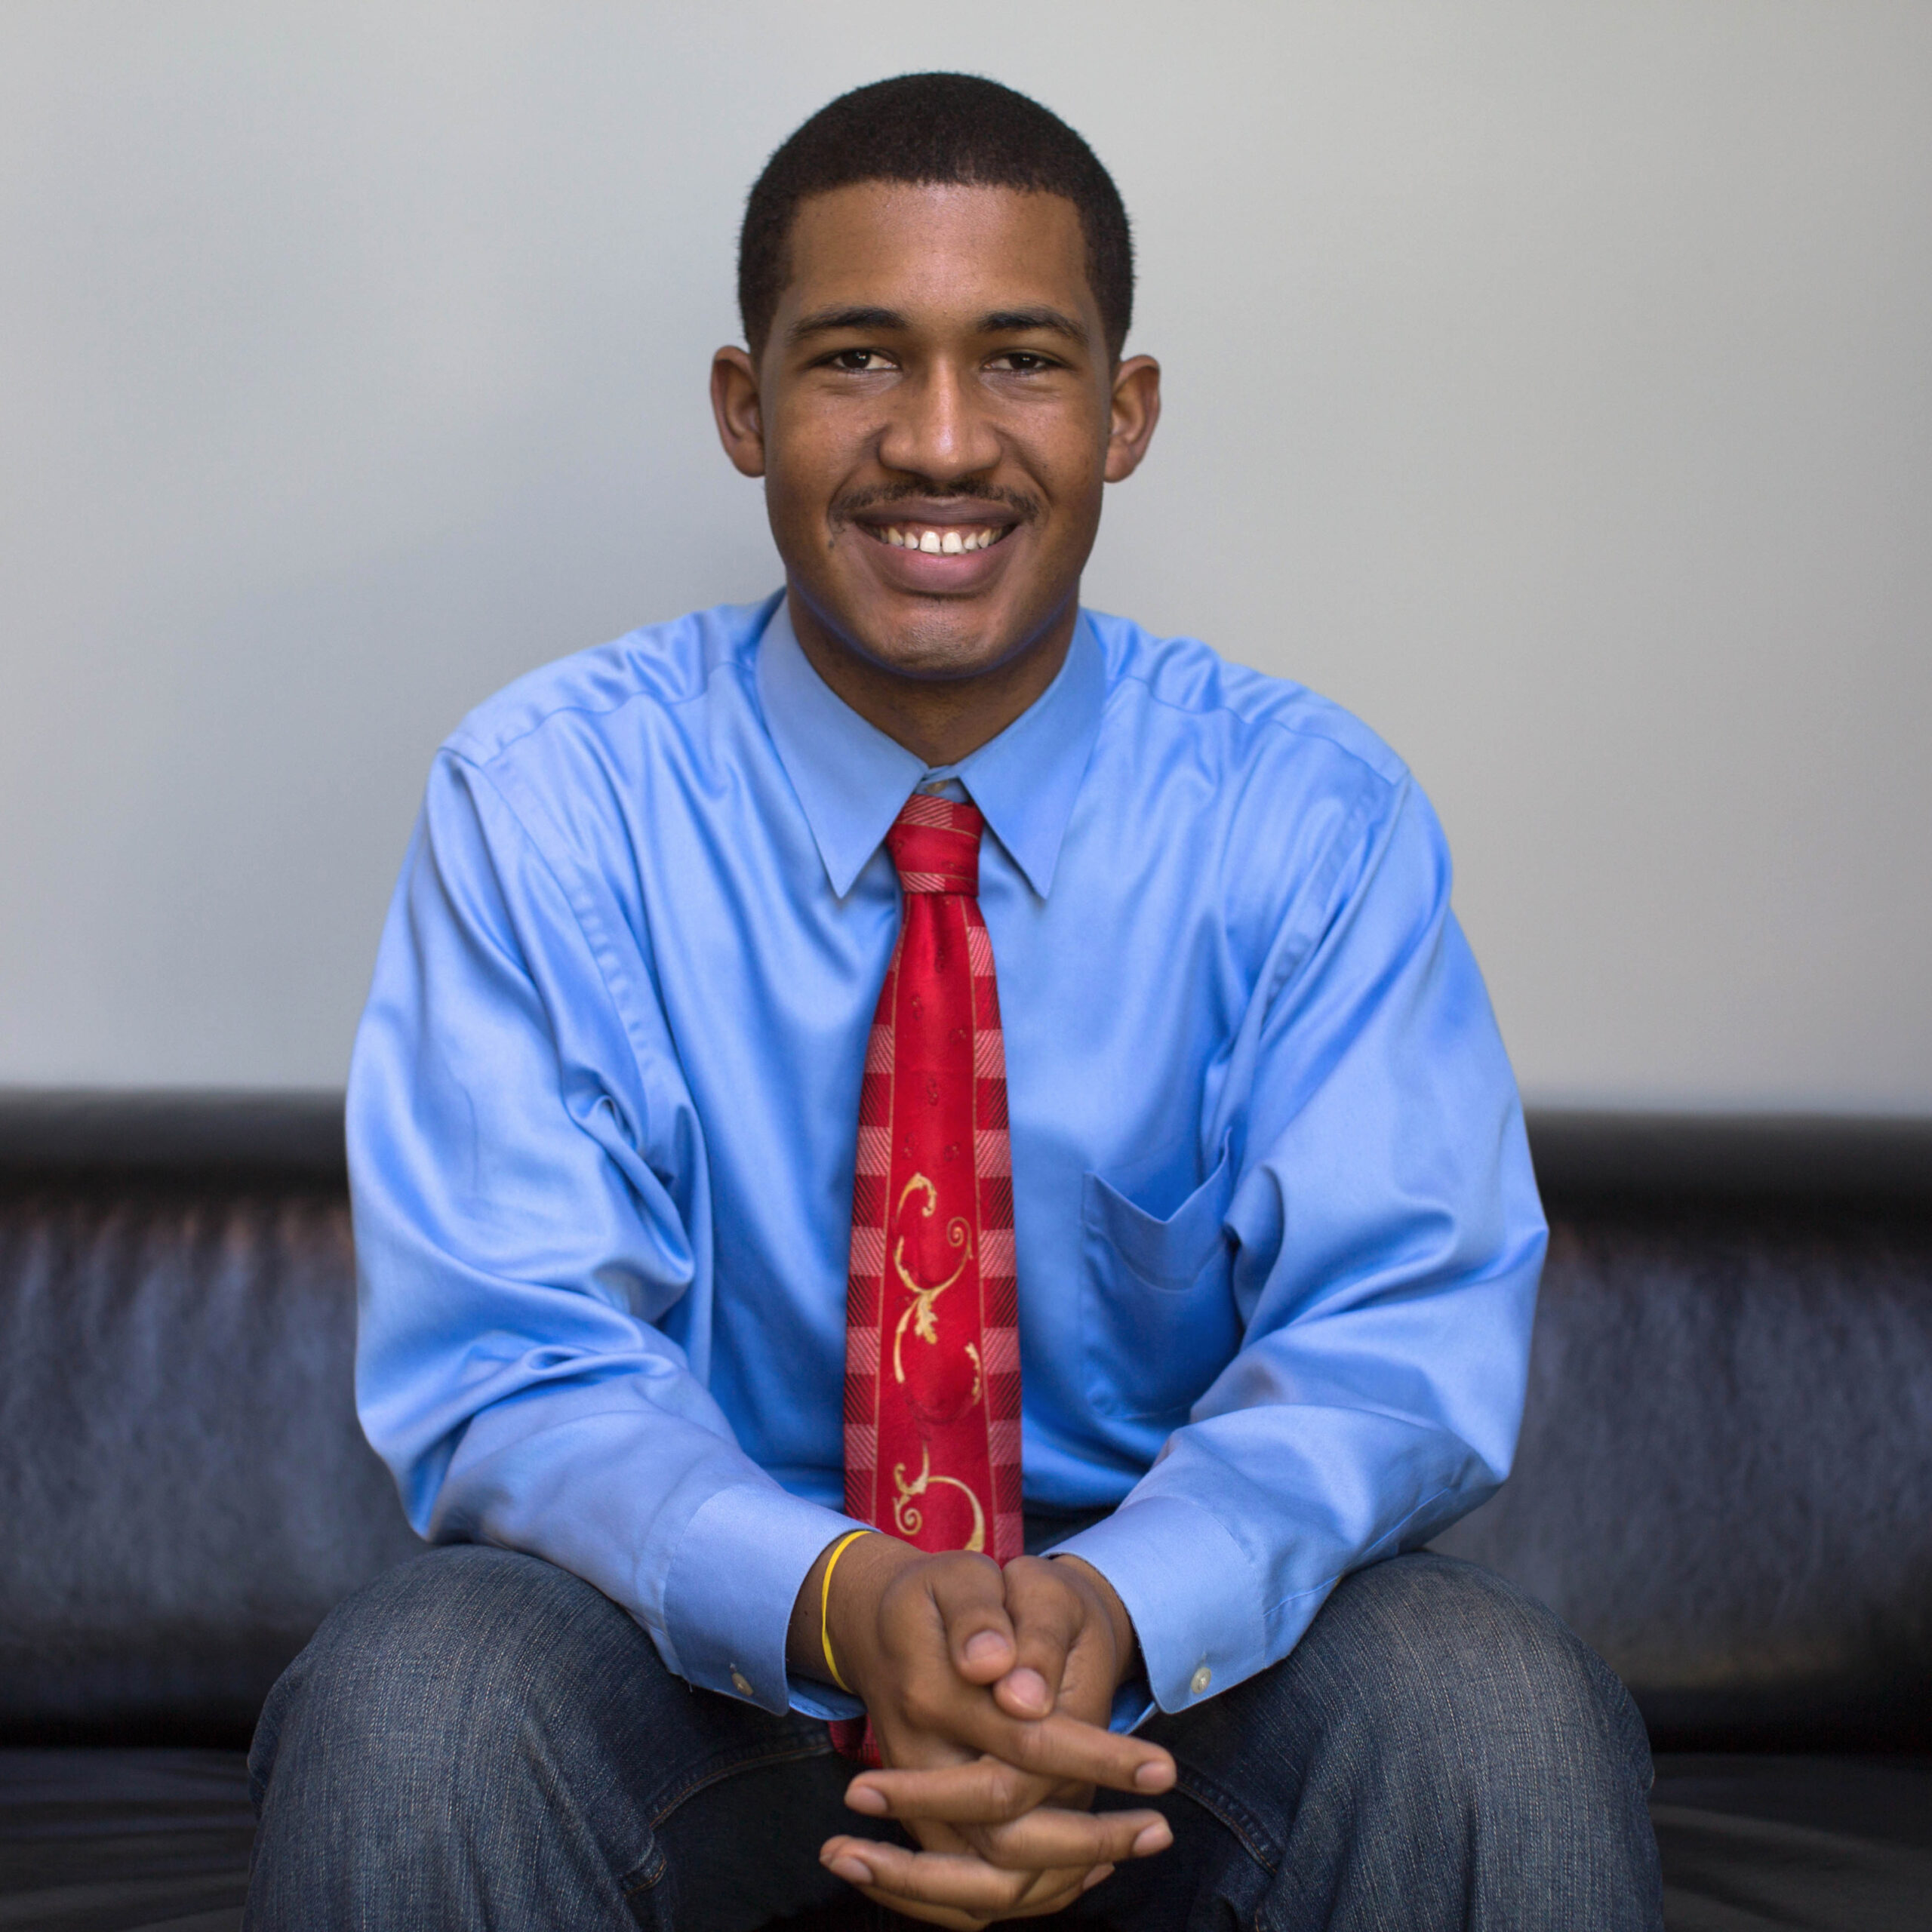 a smiling person in a blue shirt and red tie